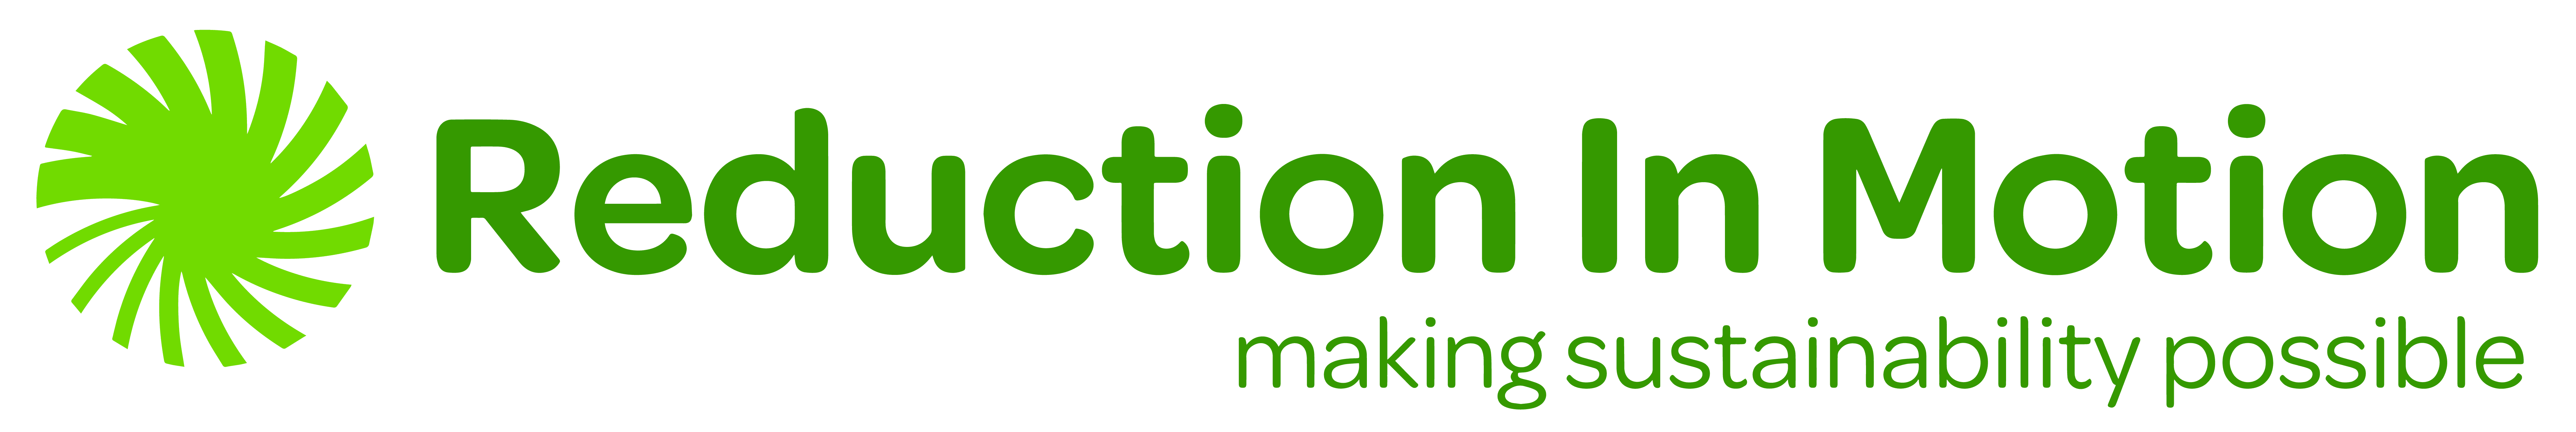 Reduction in Motion logo